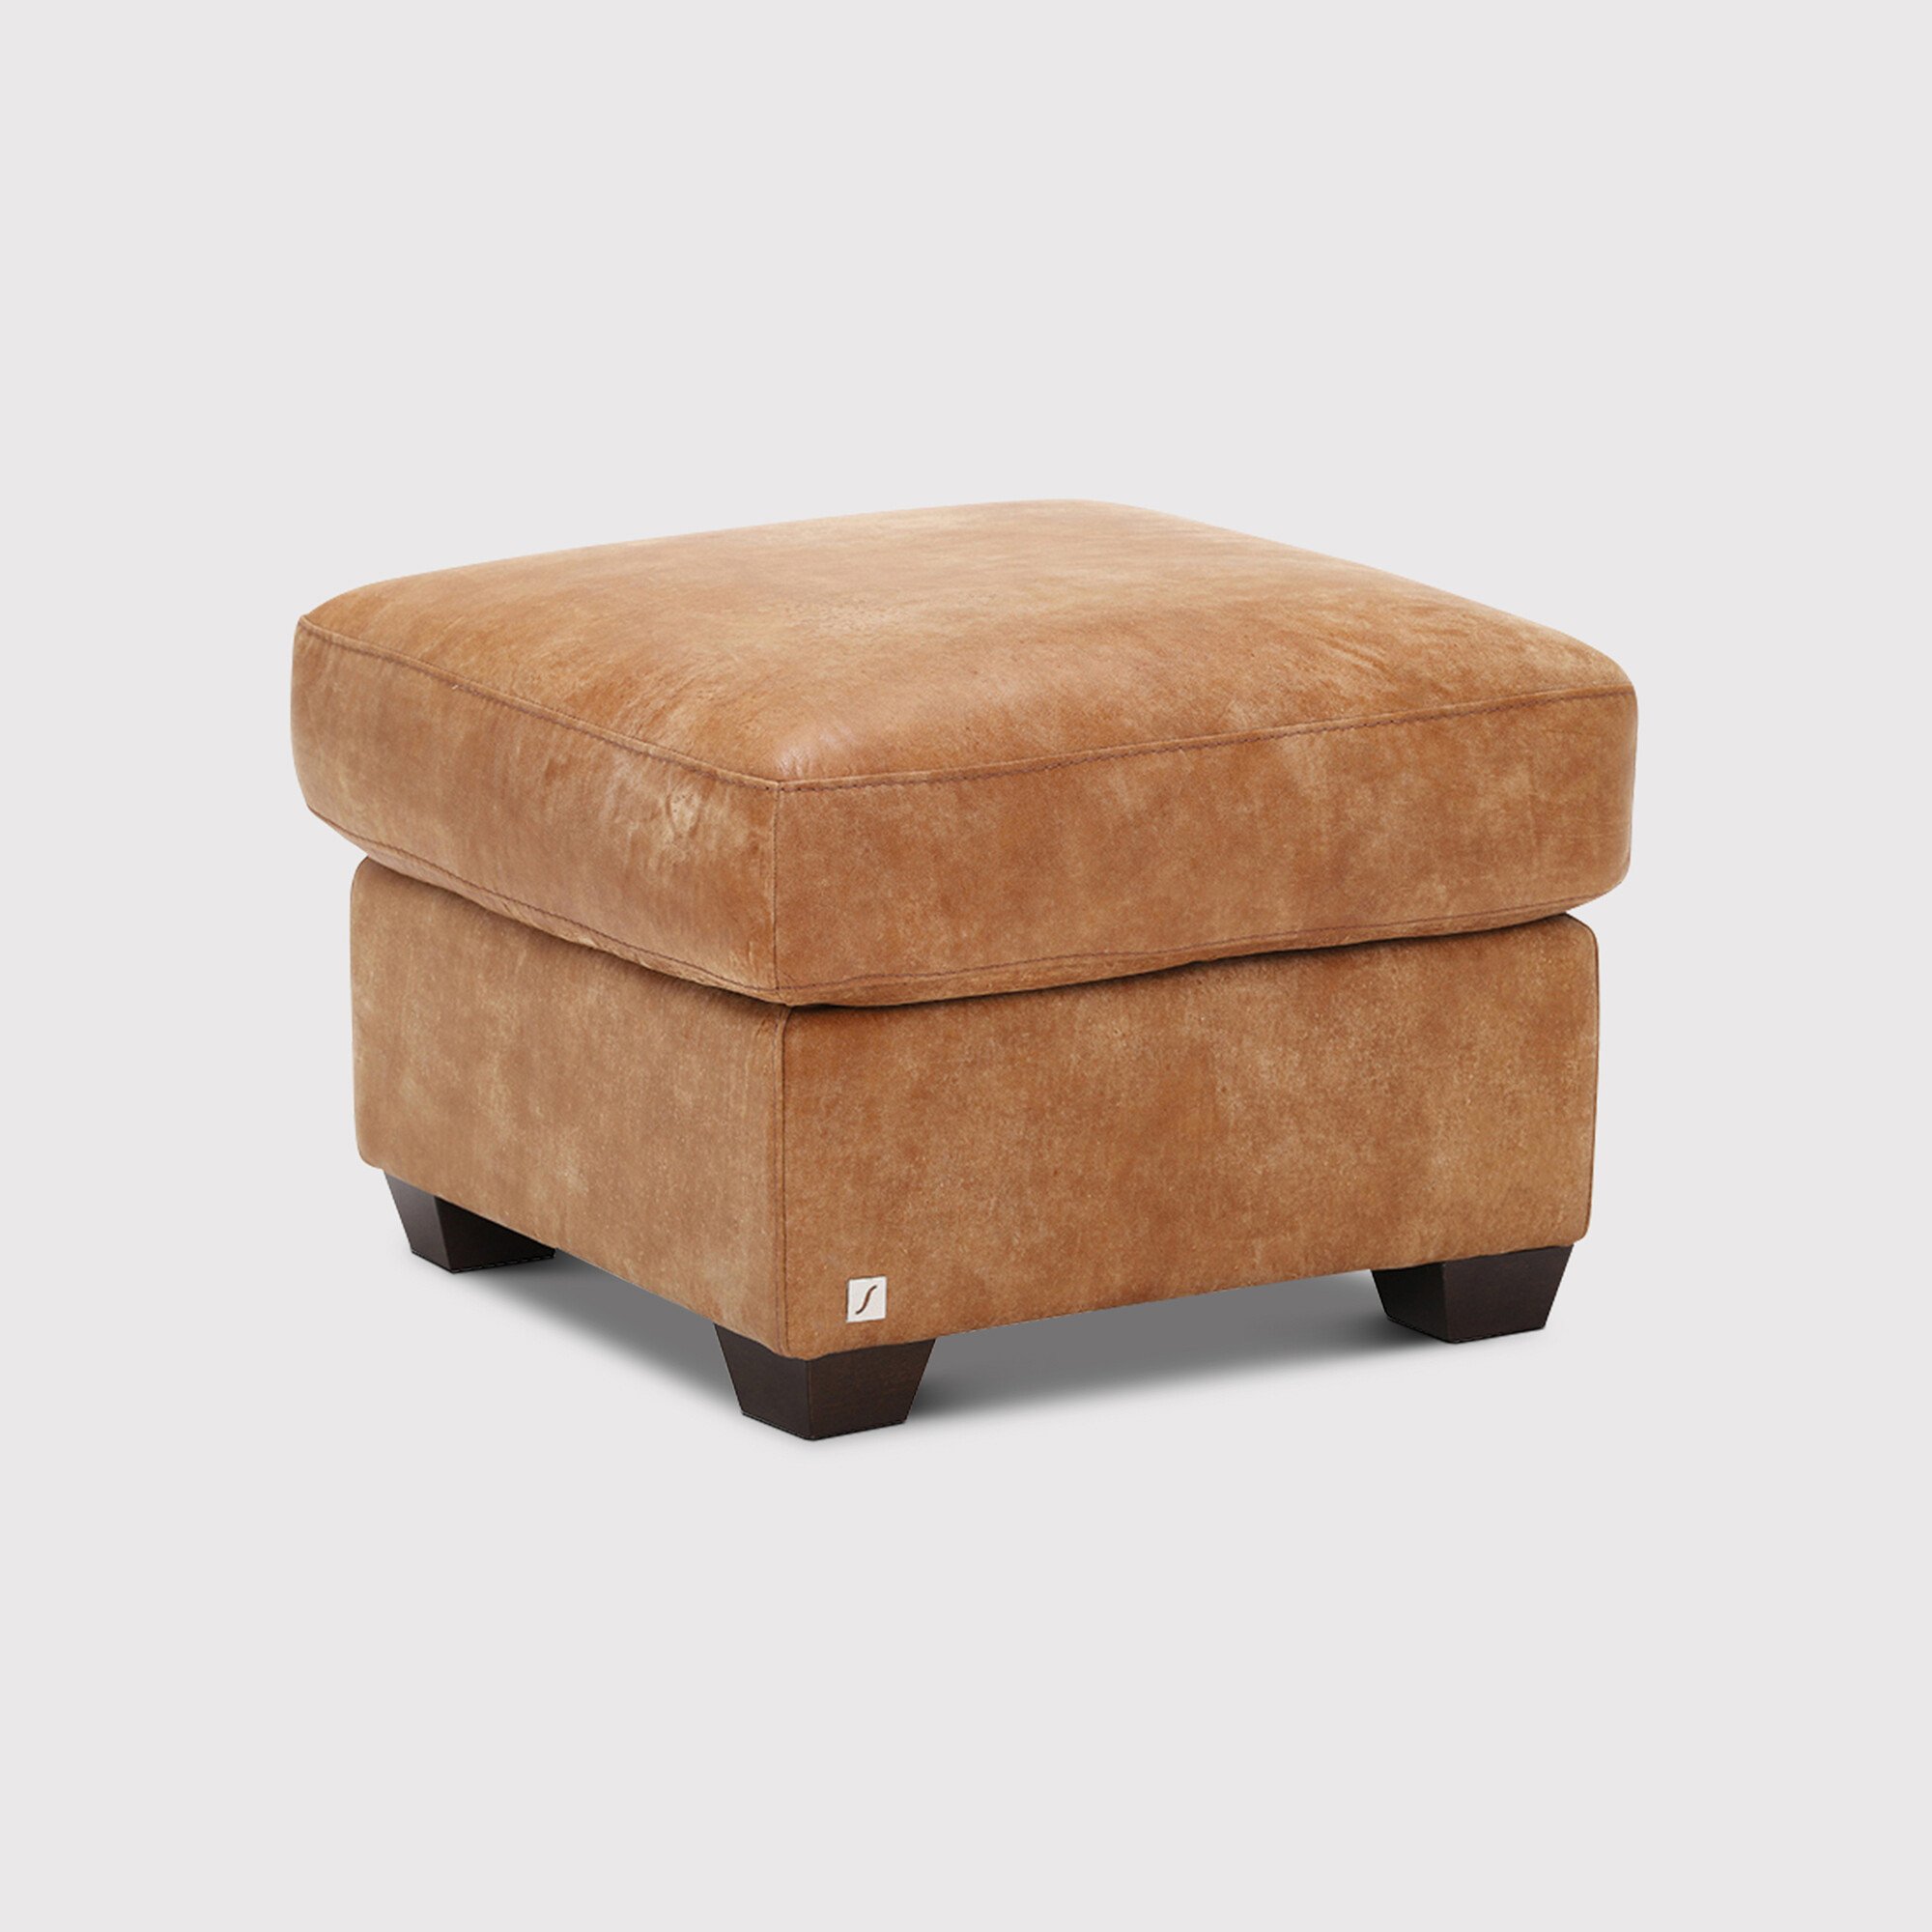 Houston Footstool, Brown Leather | Barker & Stonehouse